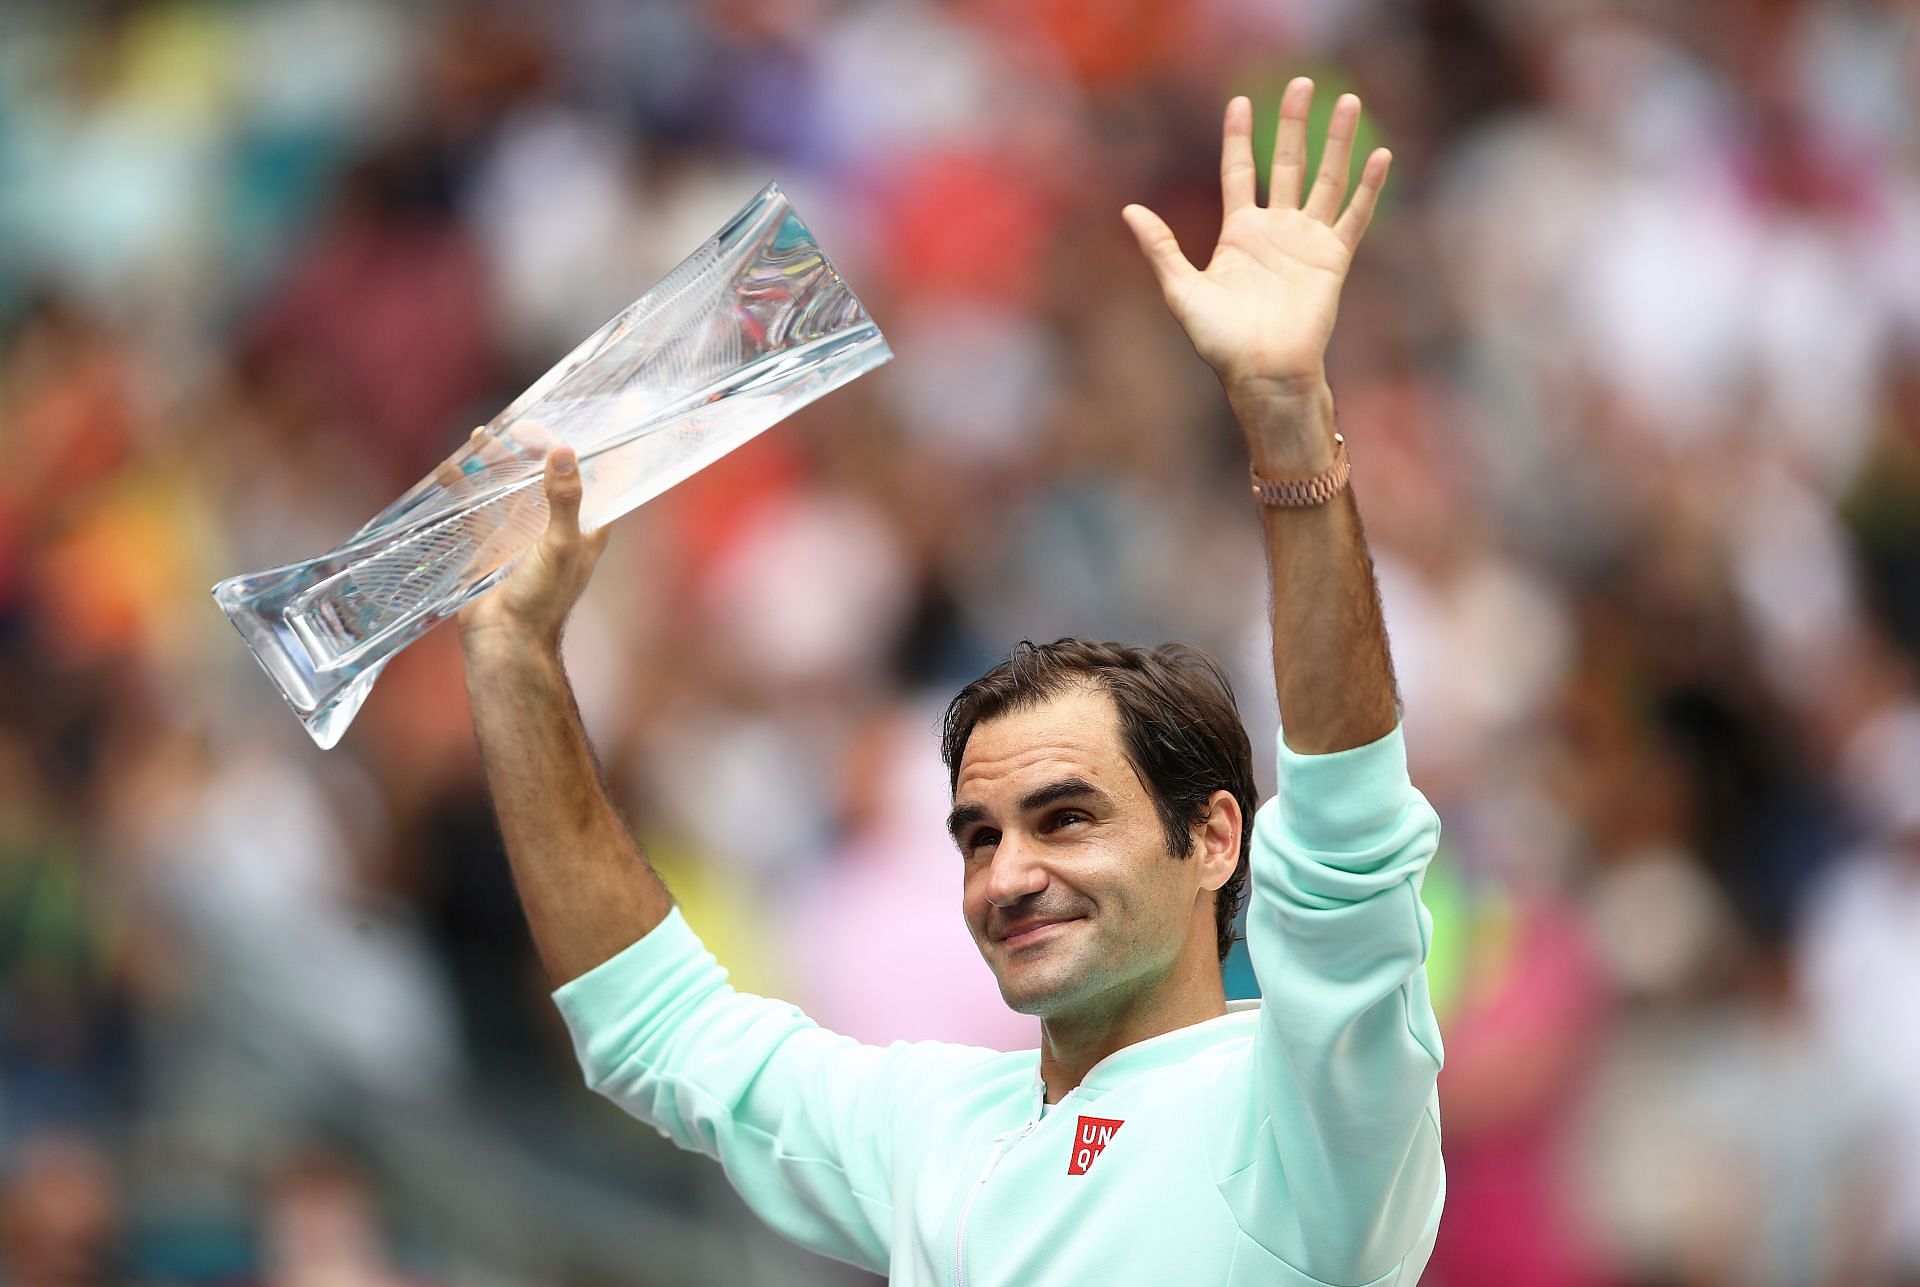 Roger Federer has won four Masters 1000 tournaments after turning 35